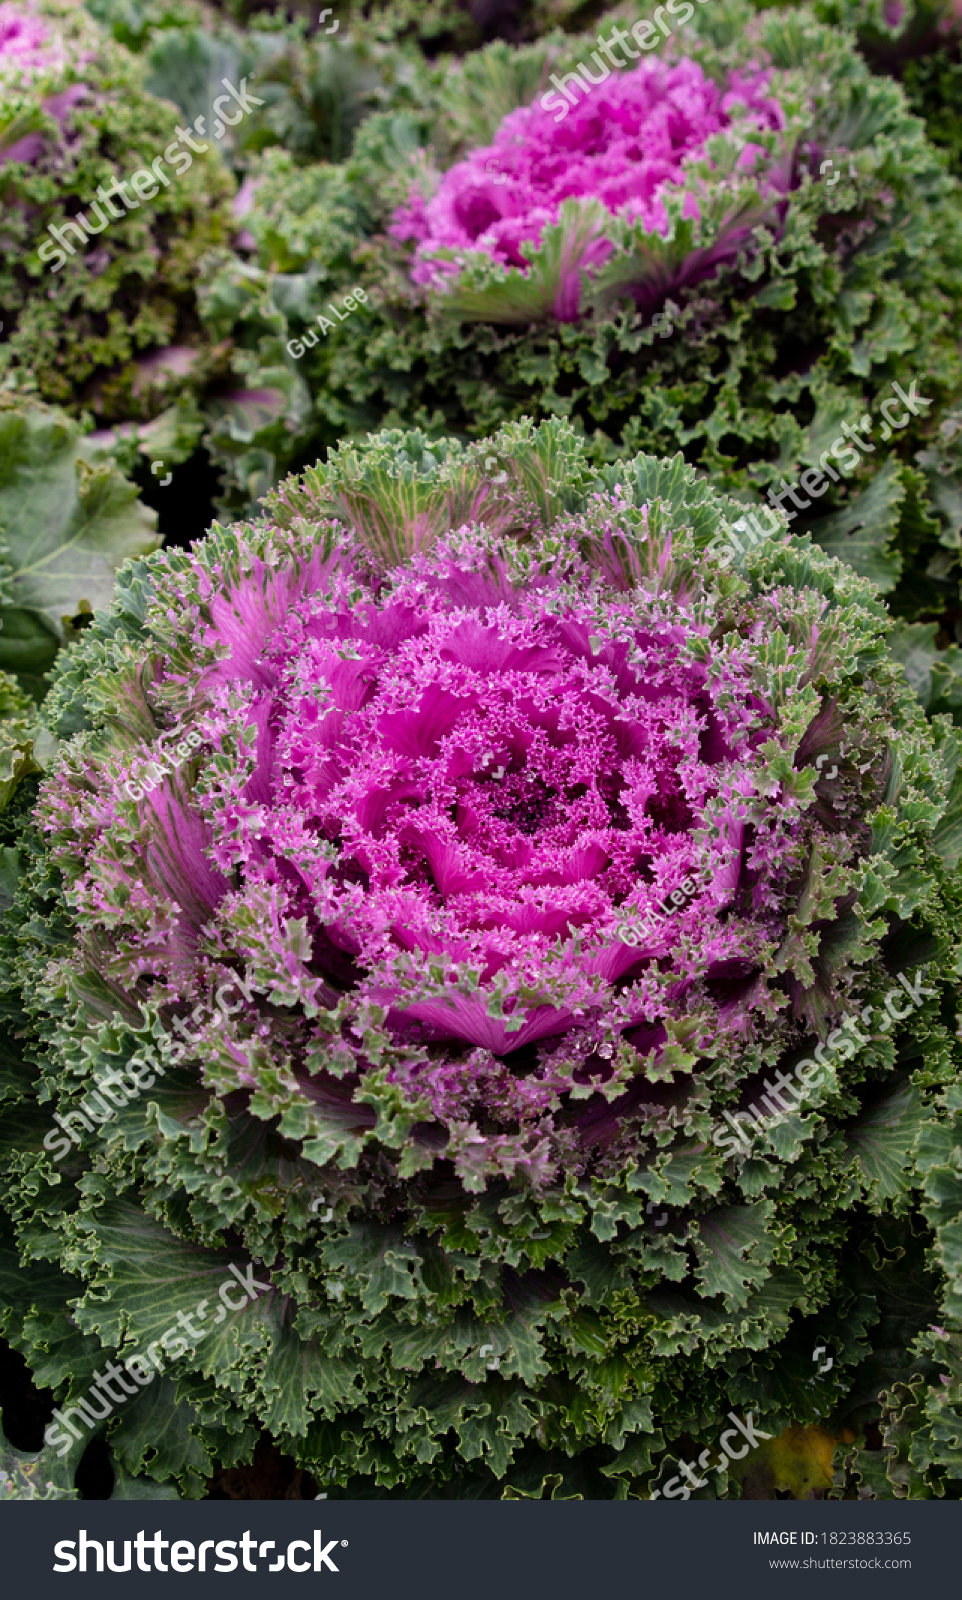 Ornamental cabbage, with a bright purple center and green leaves.
 #1823883365